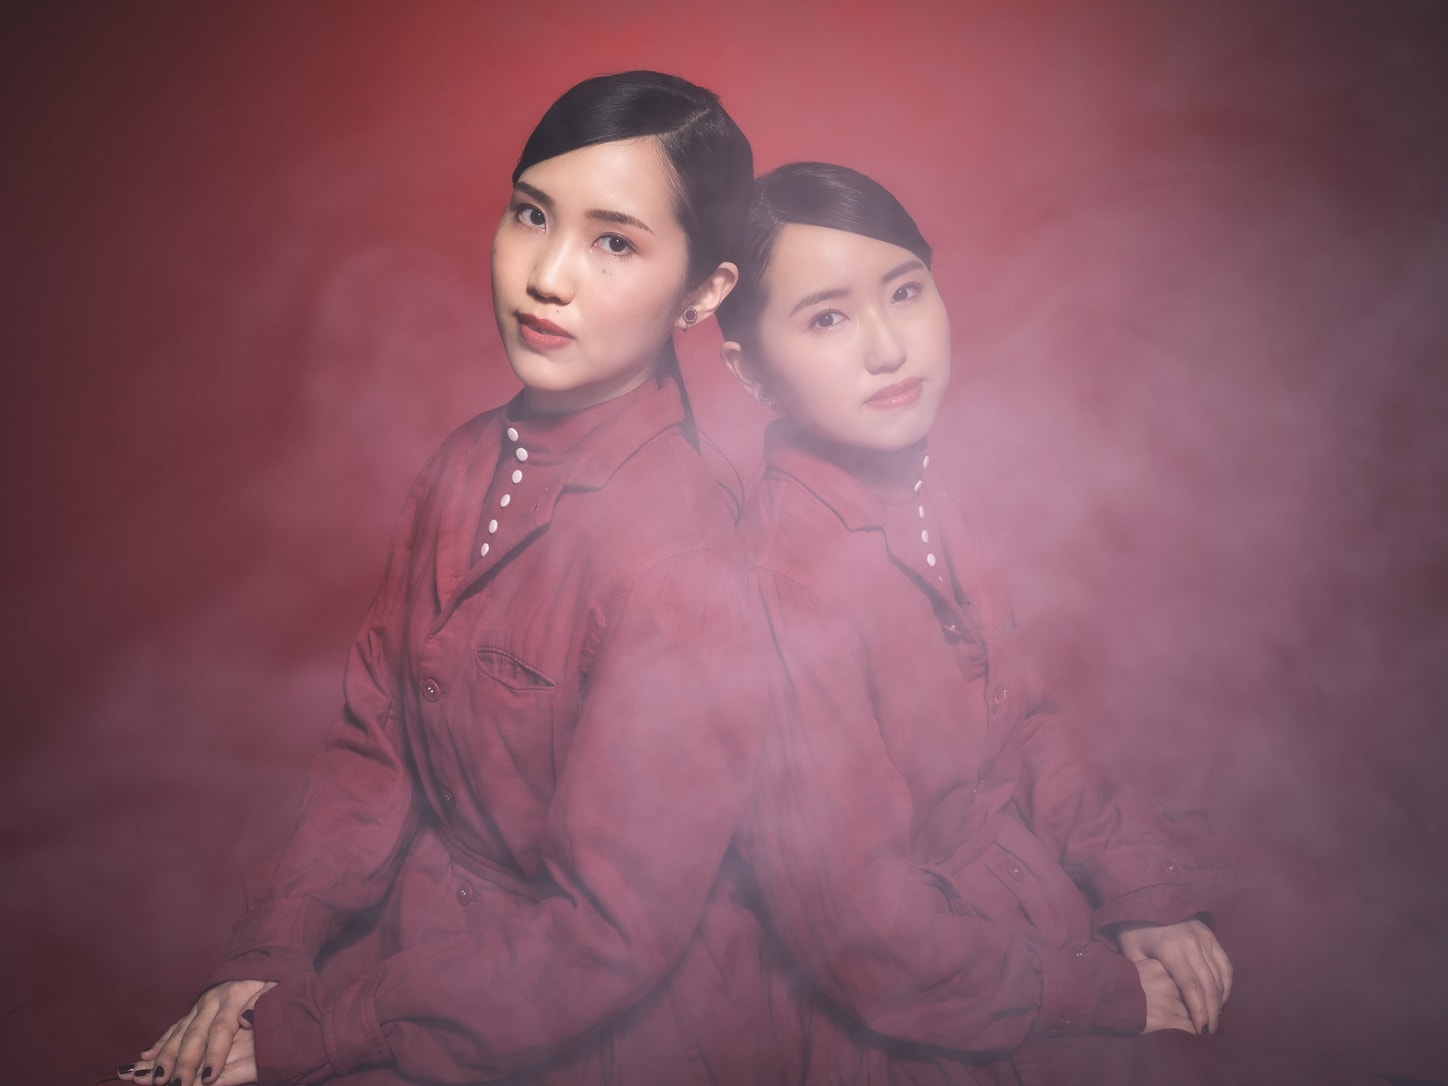 New Album Shows that the Sister Duo Kitri are All Grown Up